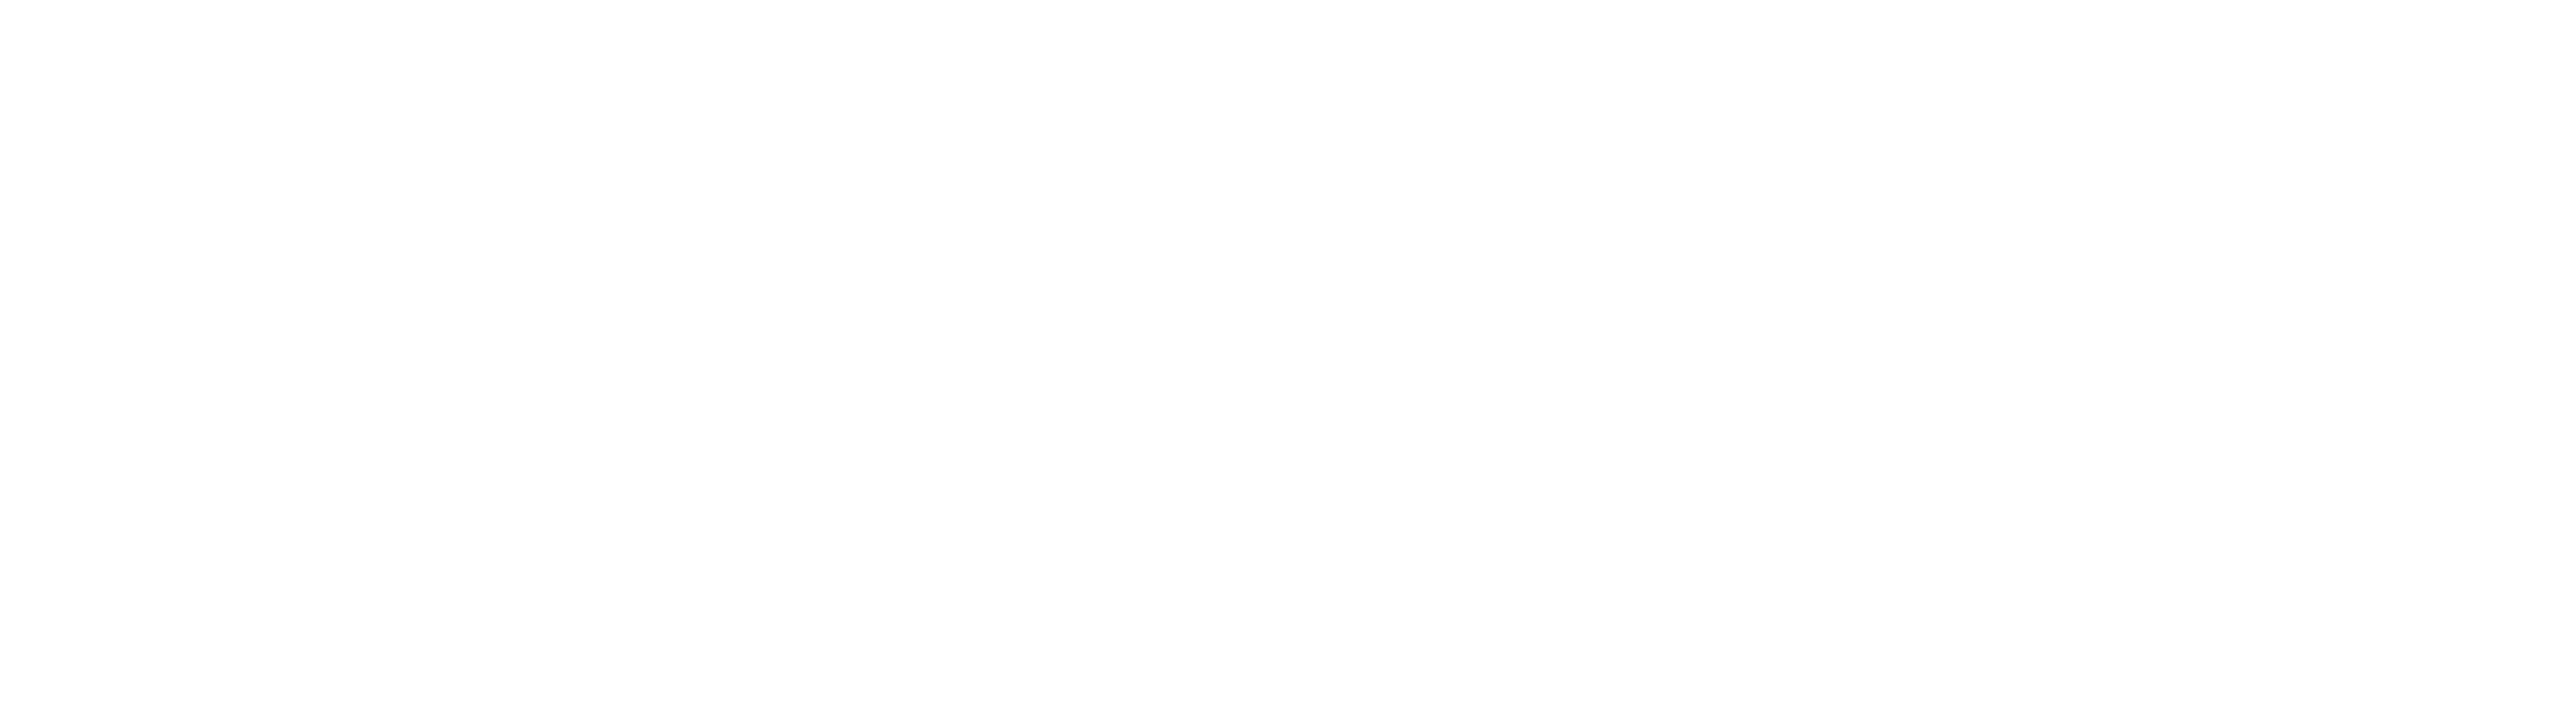 Red Key Management Limited